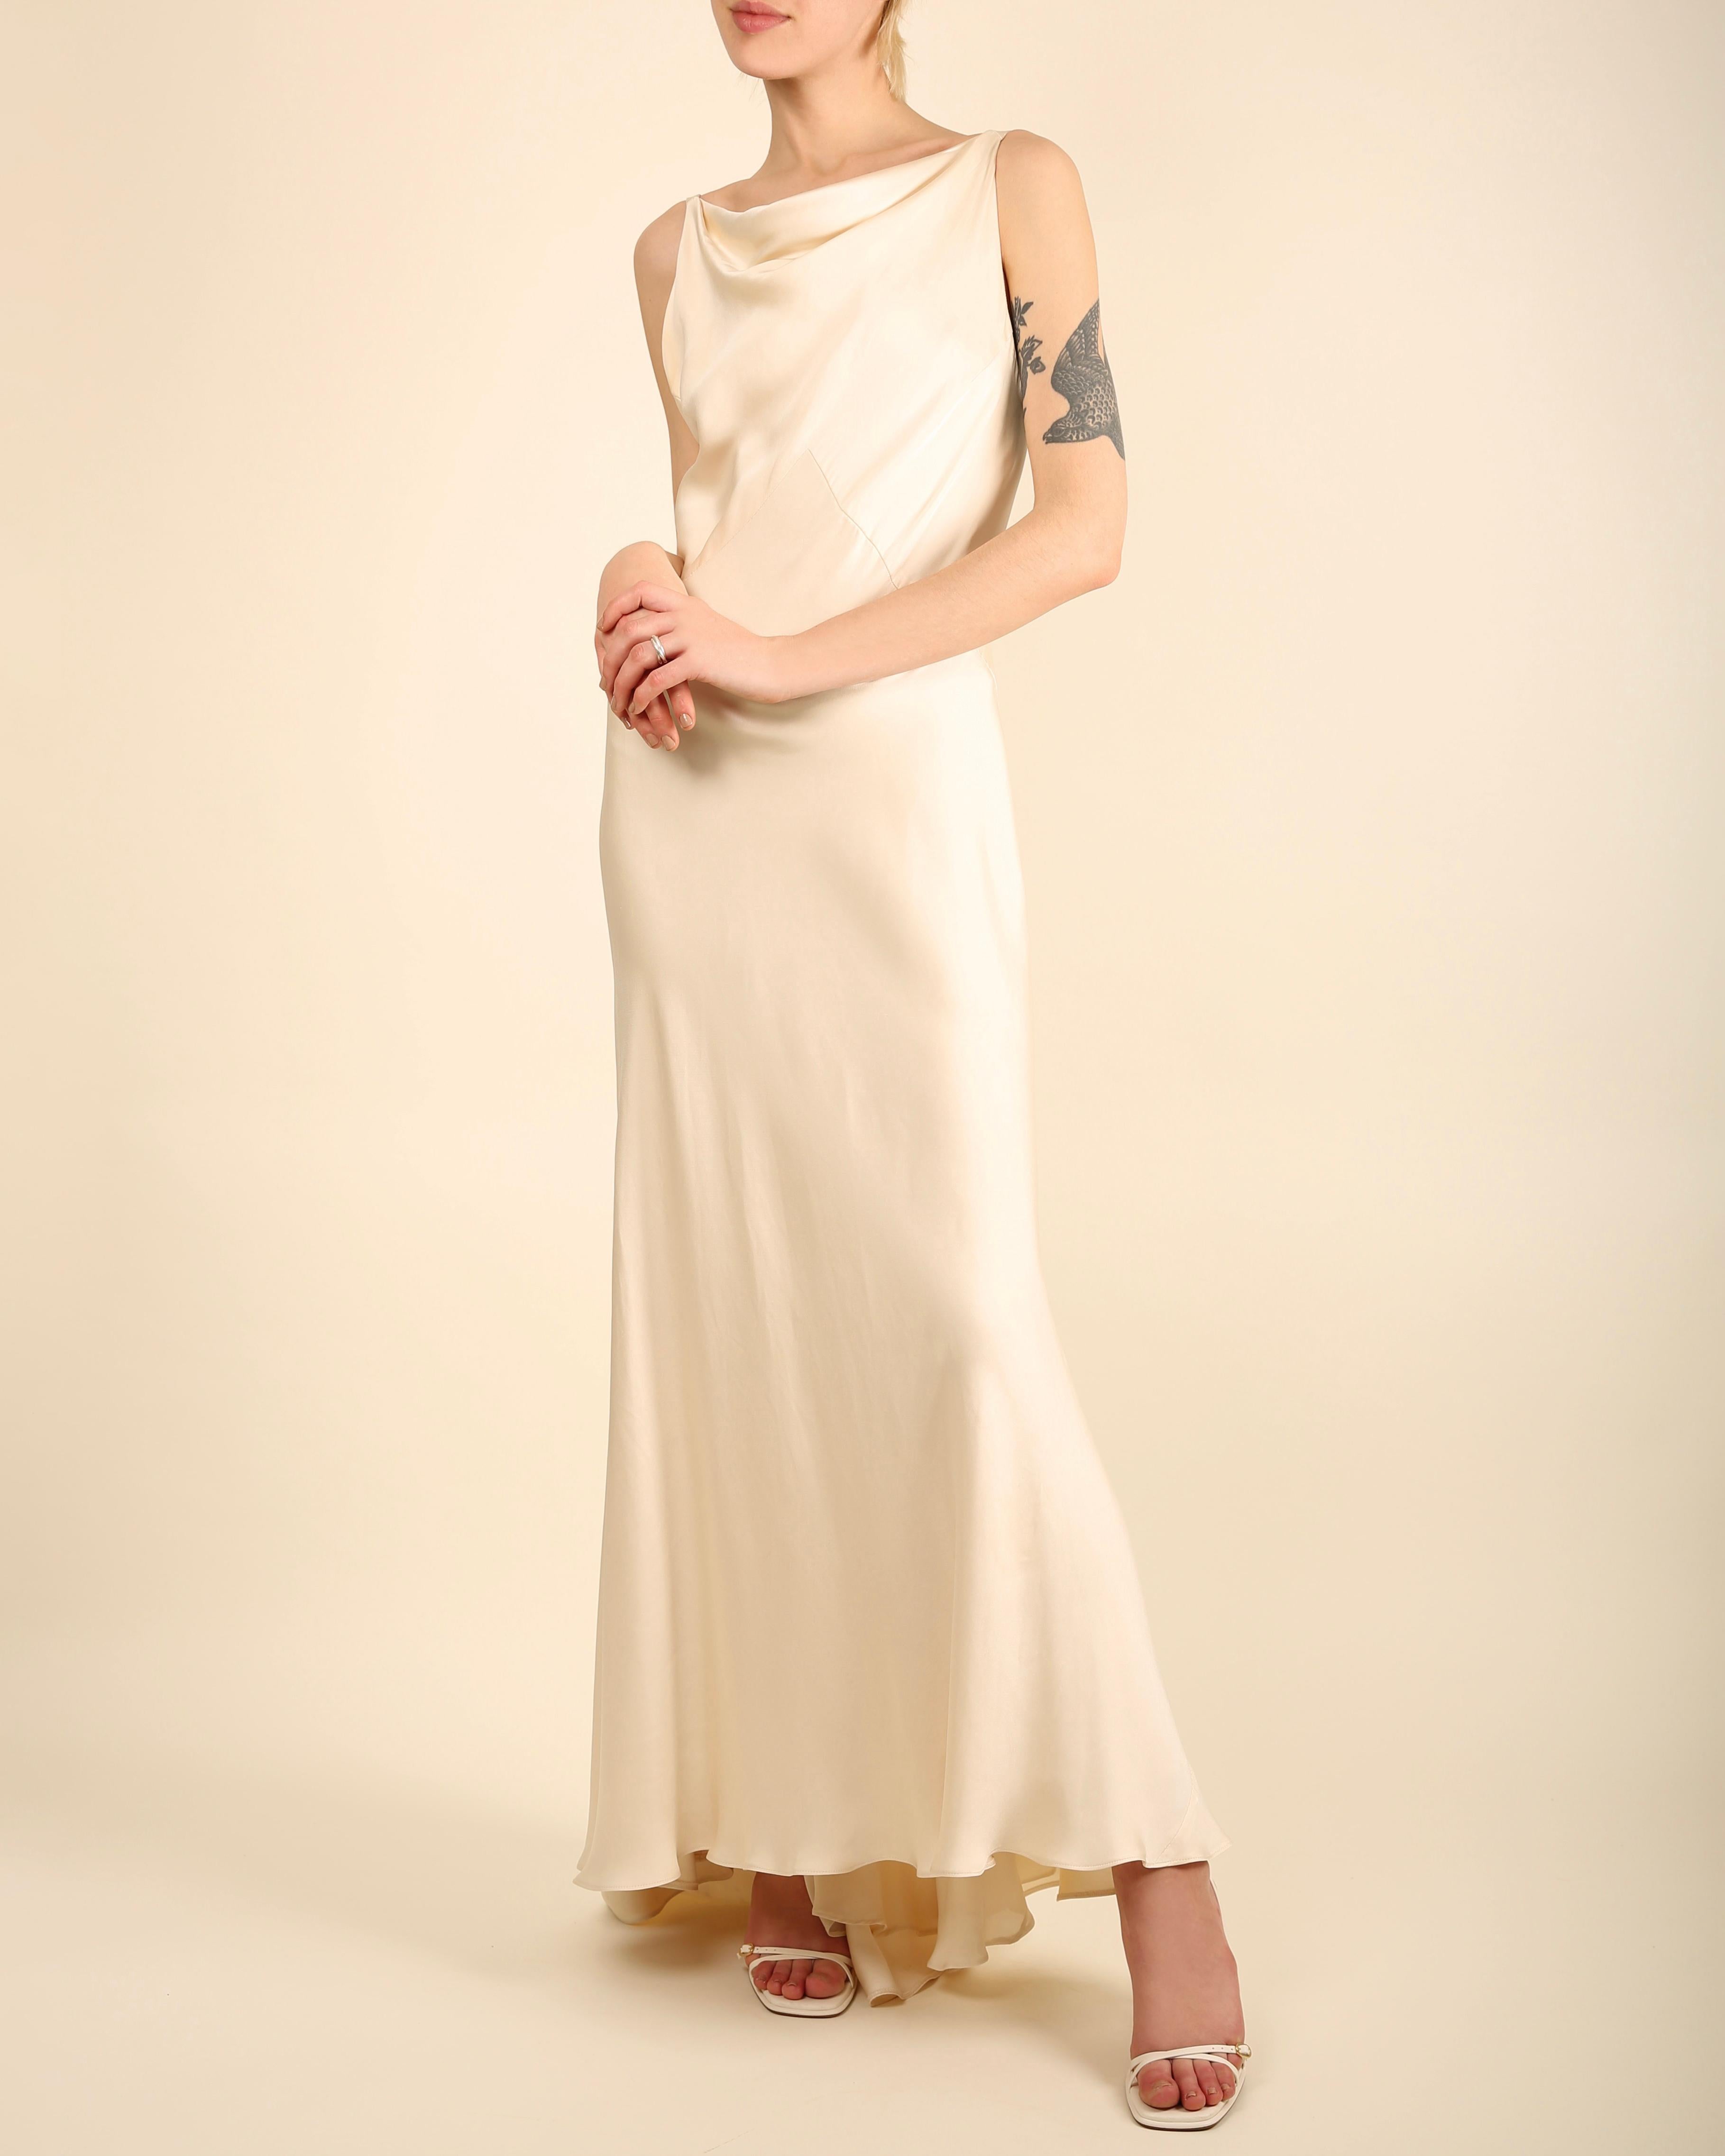 LOVE LALI Vintage

Ralph Lauren Collection (Purple Label) champagne coloured slinky sleeveless silk gown
Draped neckline
Cut on the bias so it skims the silhouette of the body just beautifully - this also allows the dress some stretch 
Backless